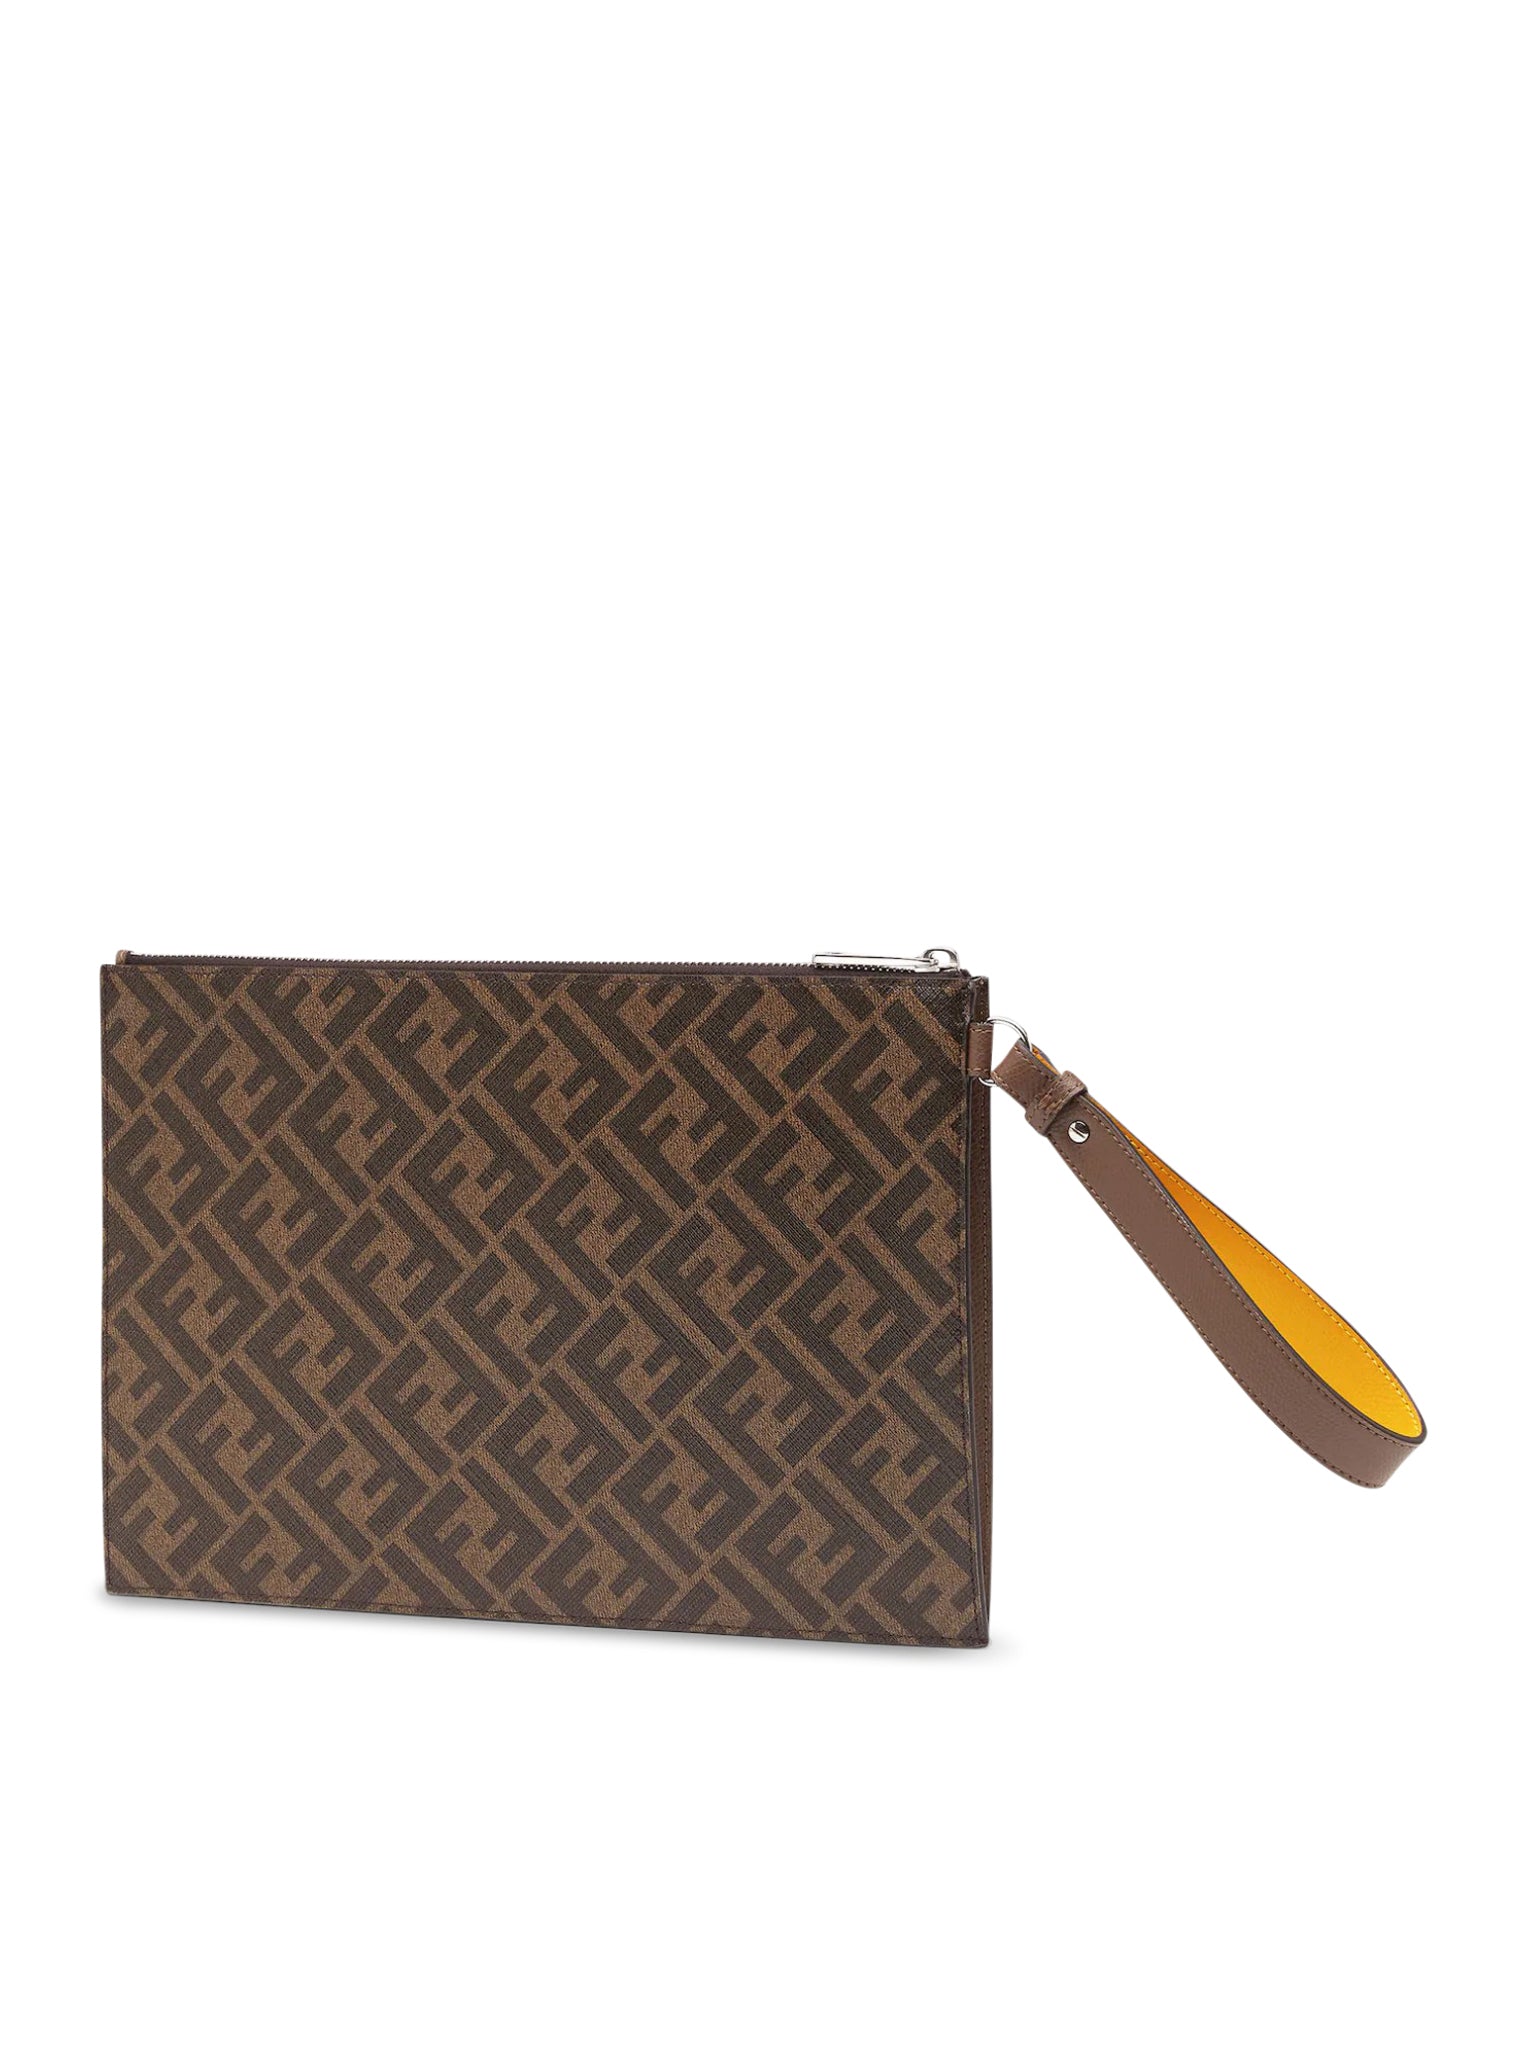 Large Flat Pouch - Brown fabric pouch